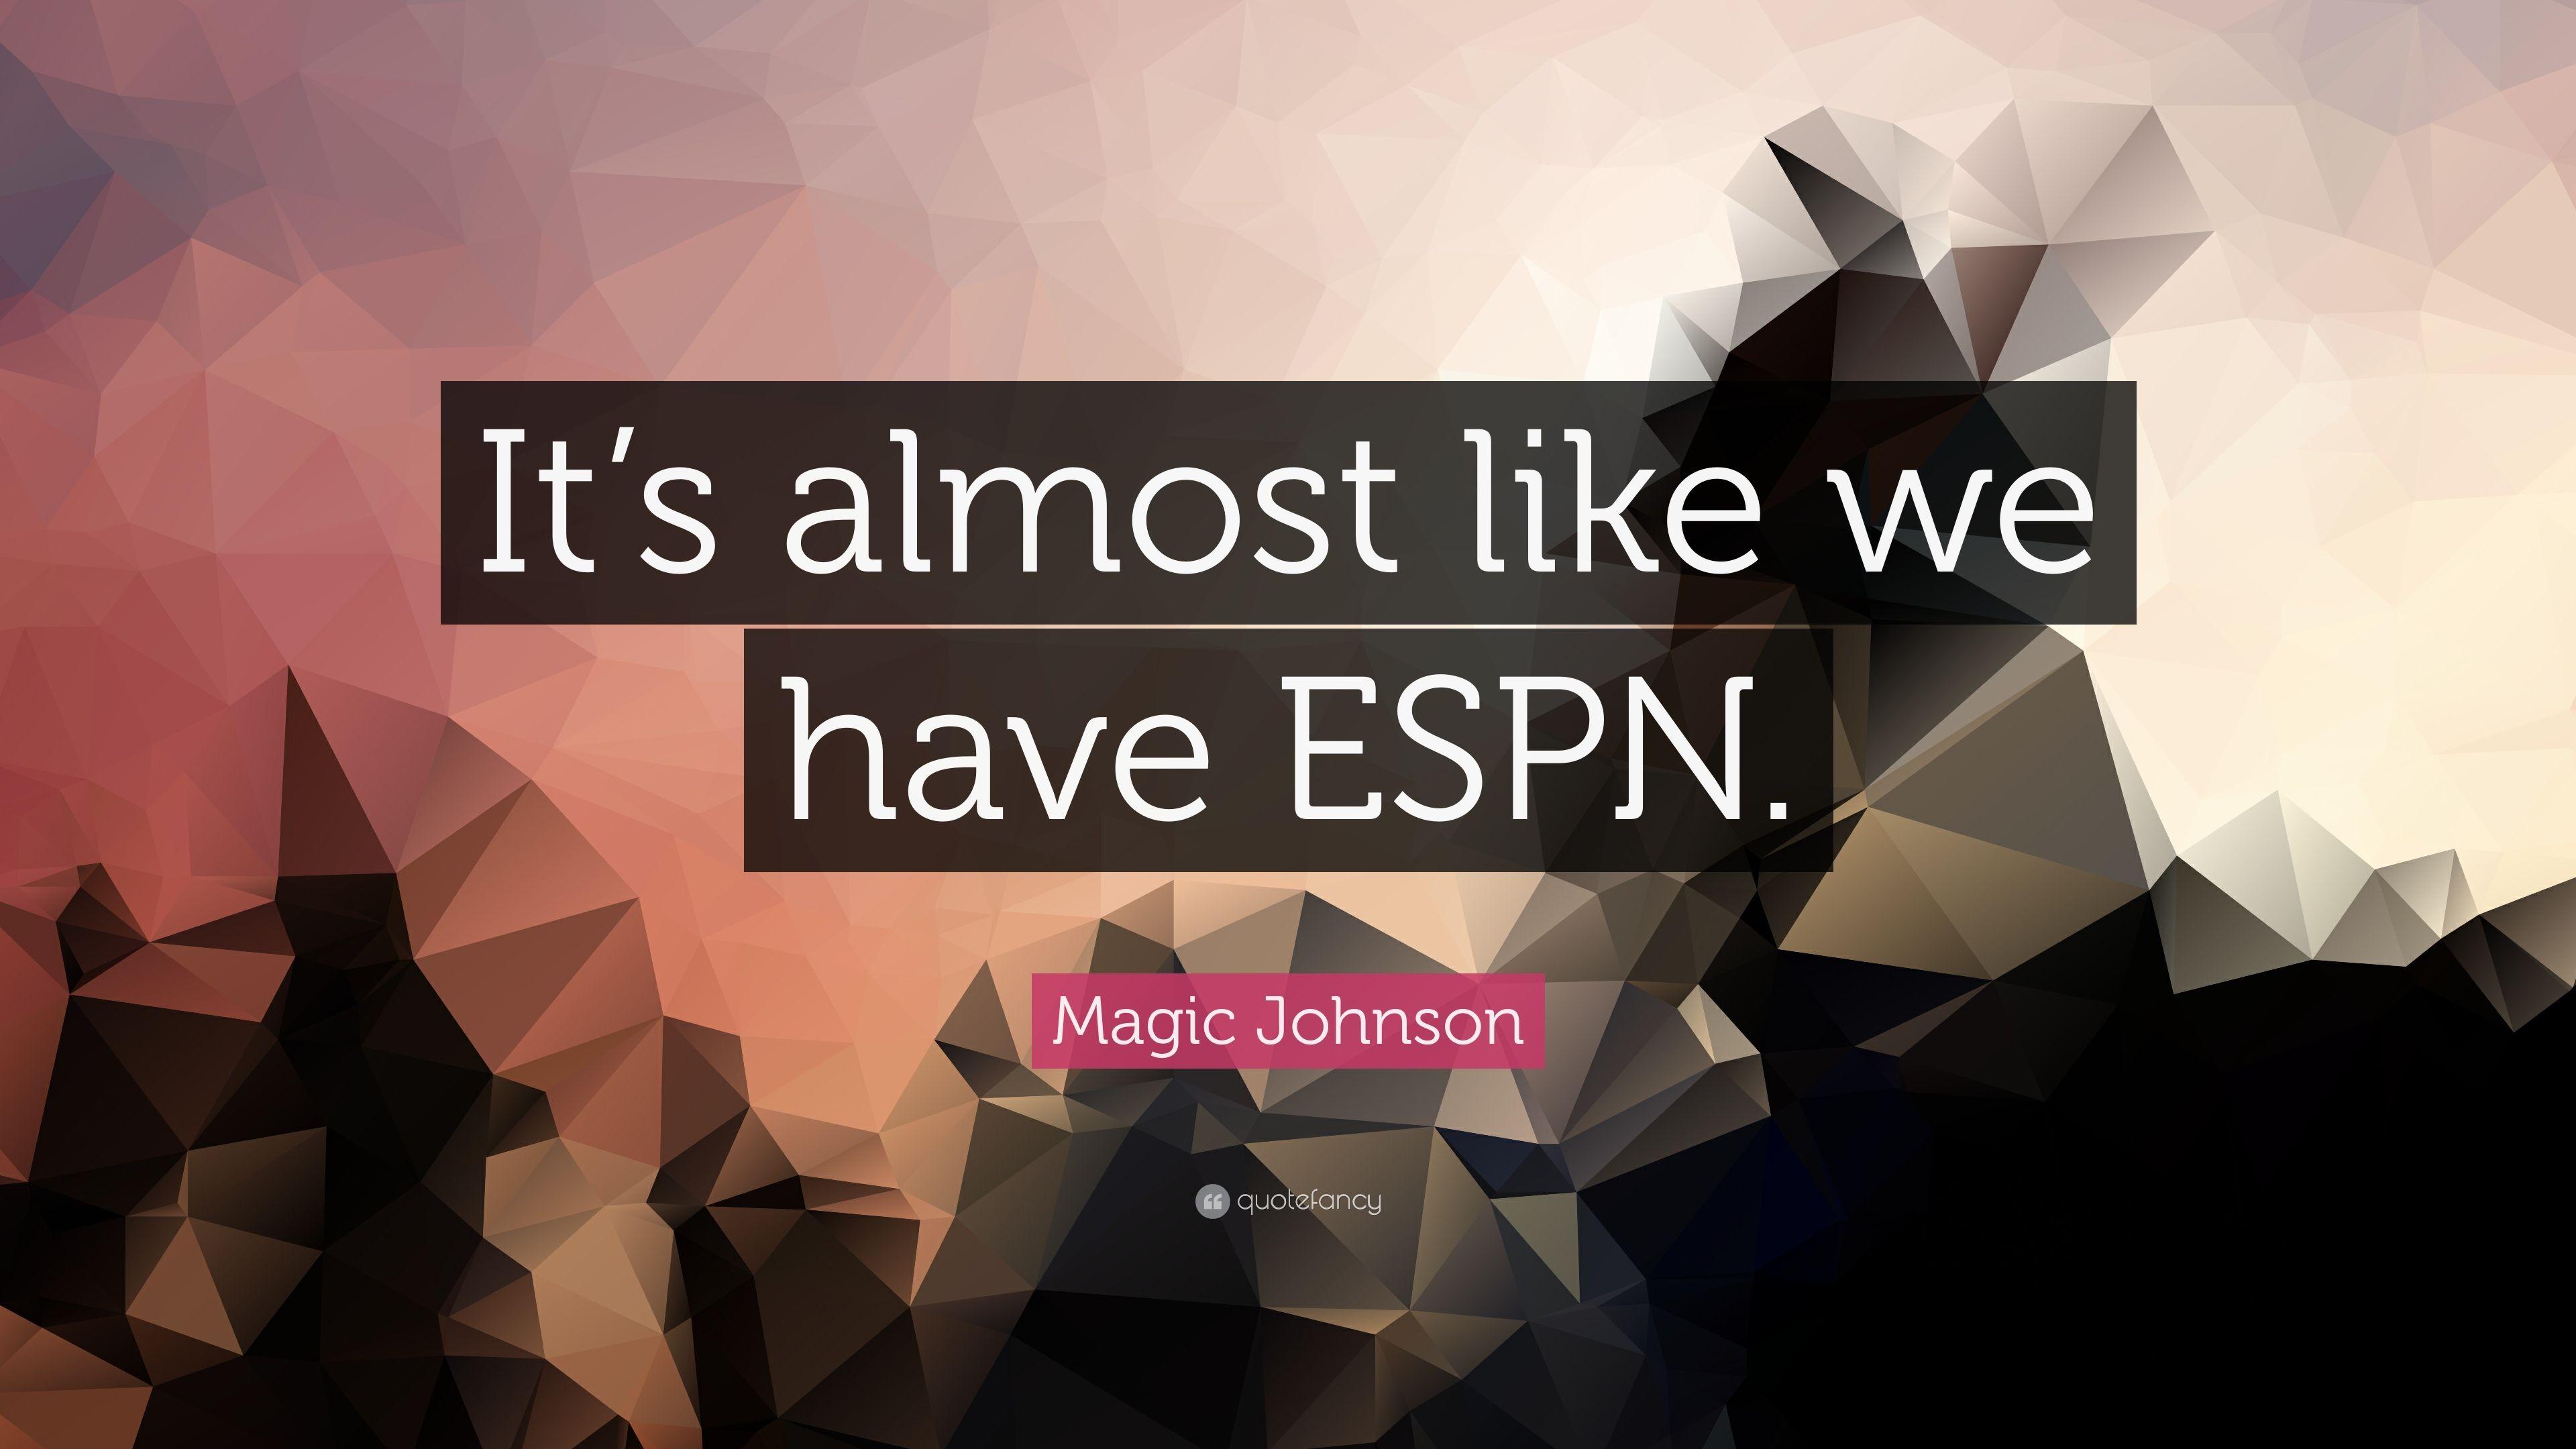 Magic Johnson Quote: “It's almost like we have ESPN.” 7 wallpaper